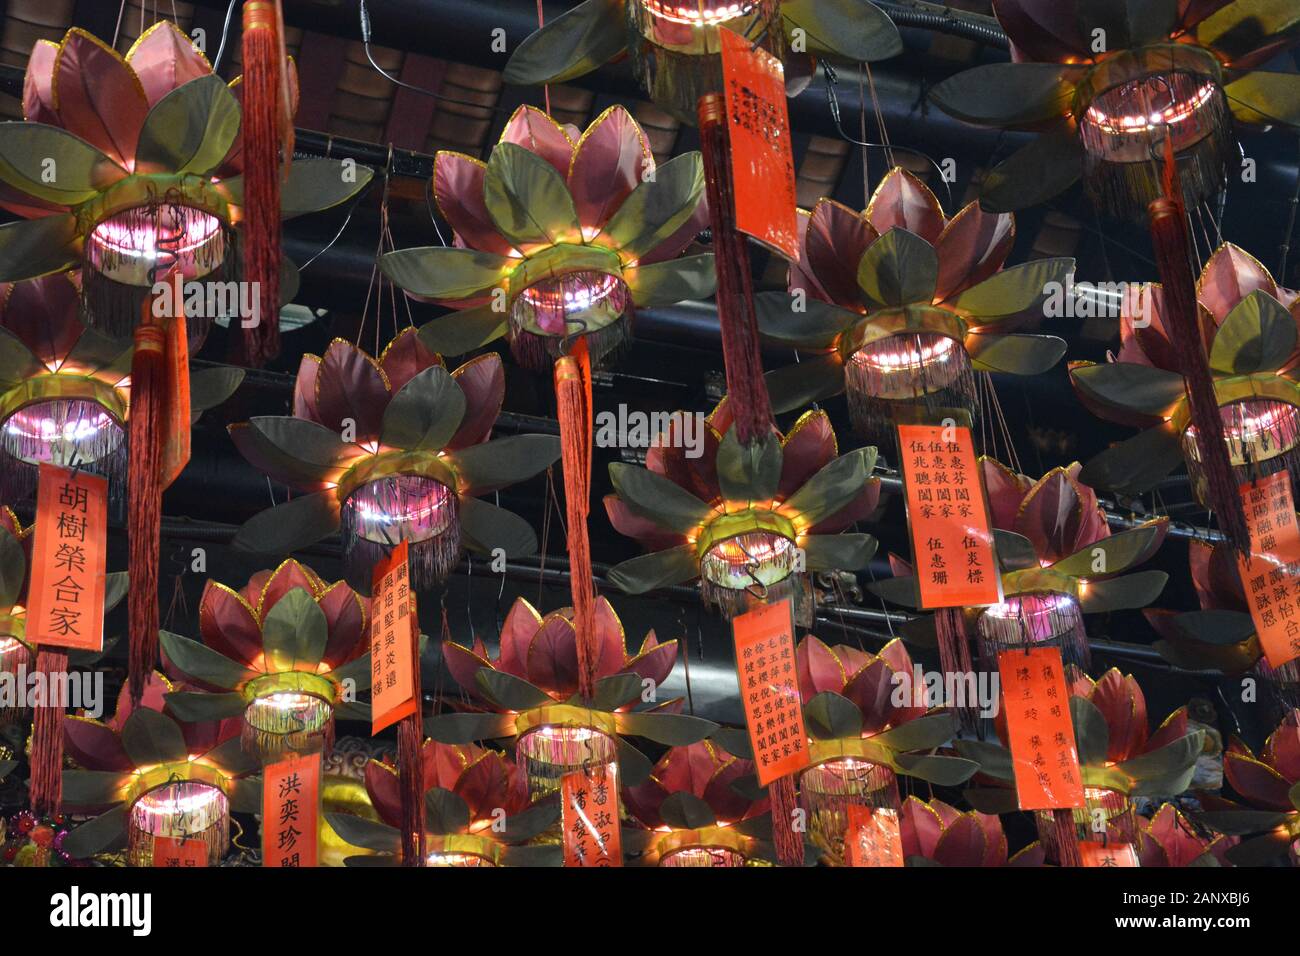 Looking up at lanterns hanging from the ceiling of the Tam Kung Temple at Shau Kei Wan in Hong Kong. Stock Photo